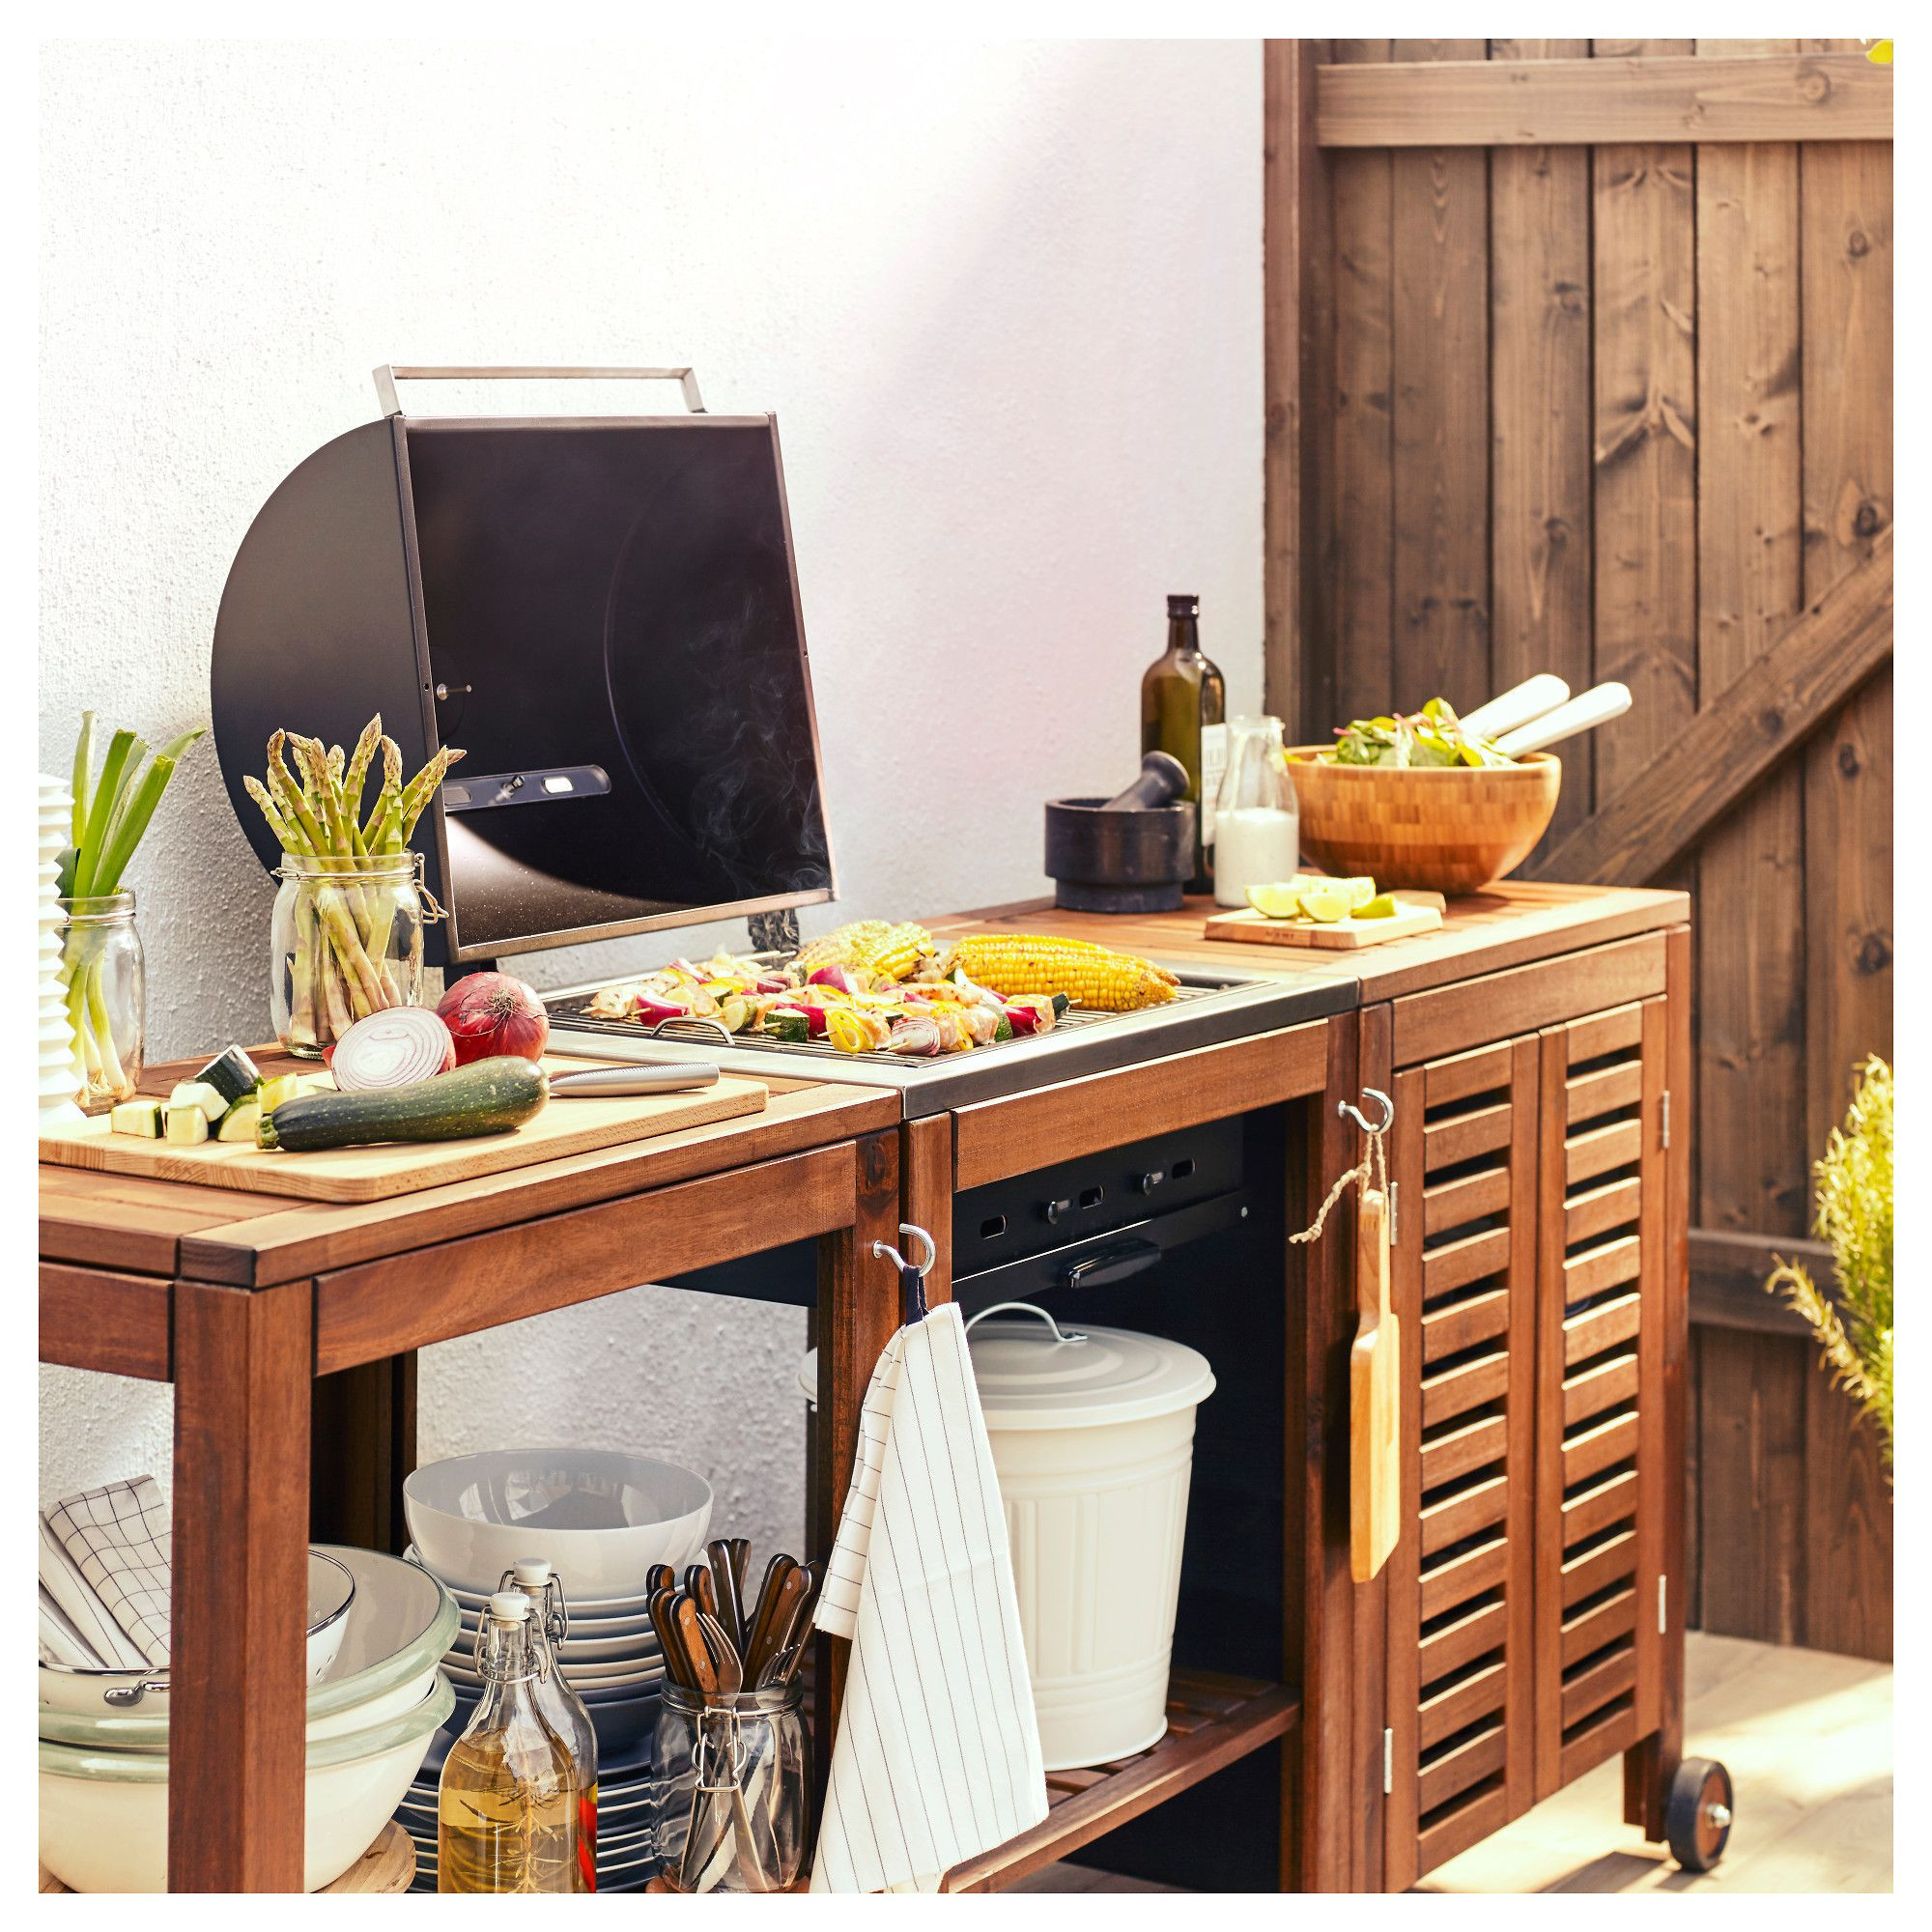 Ikea Outdoor Kitchen
 Furniture and Home Furnishings